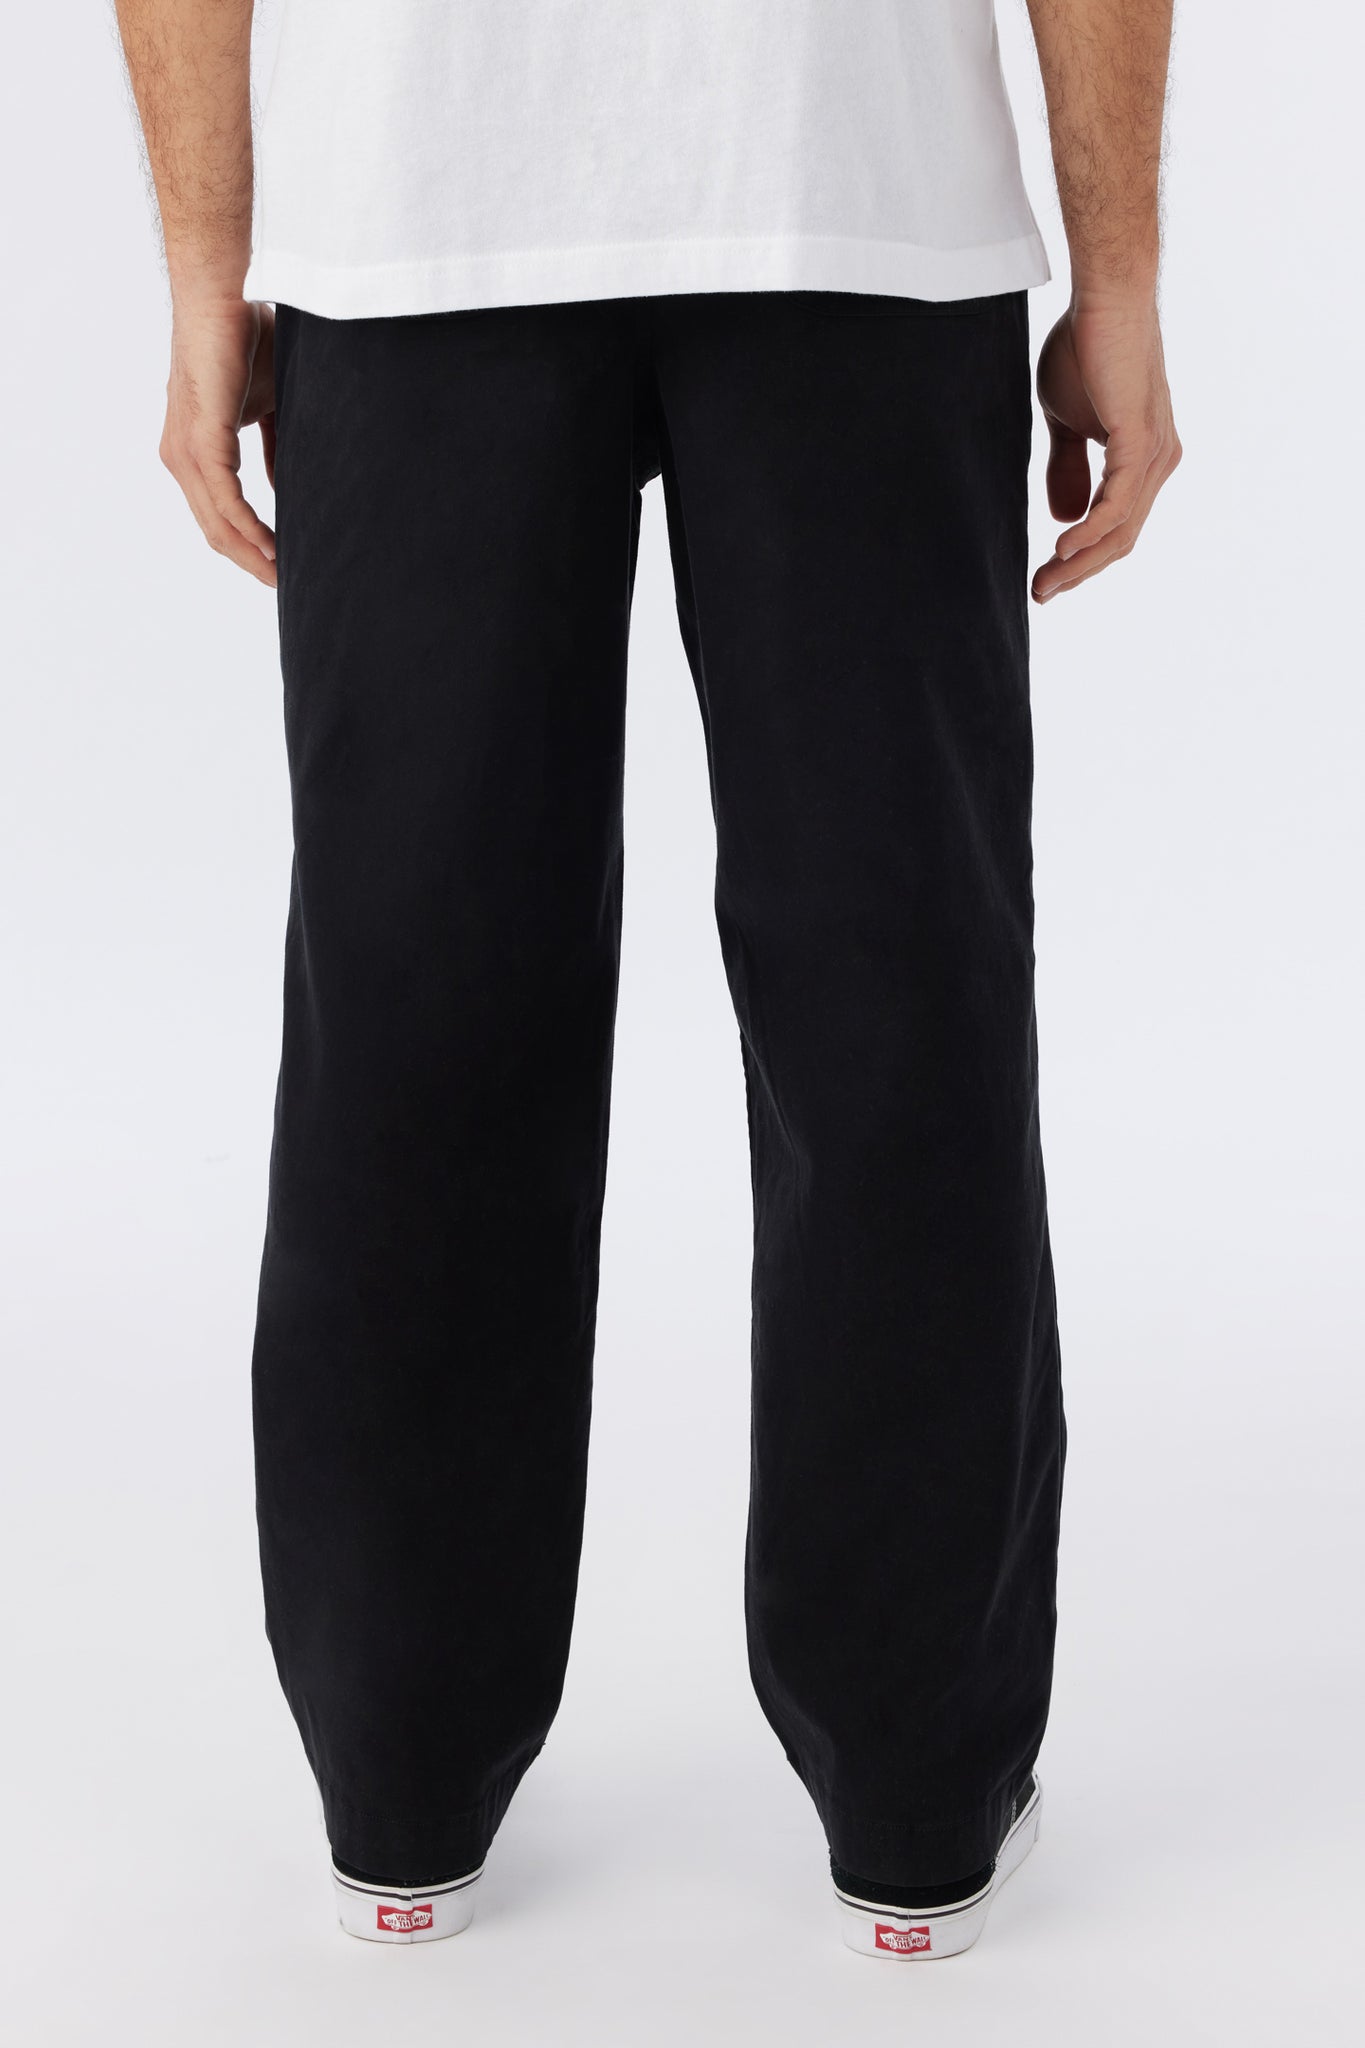 Polar Fleece Wholesale Pants with Front Pockets